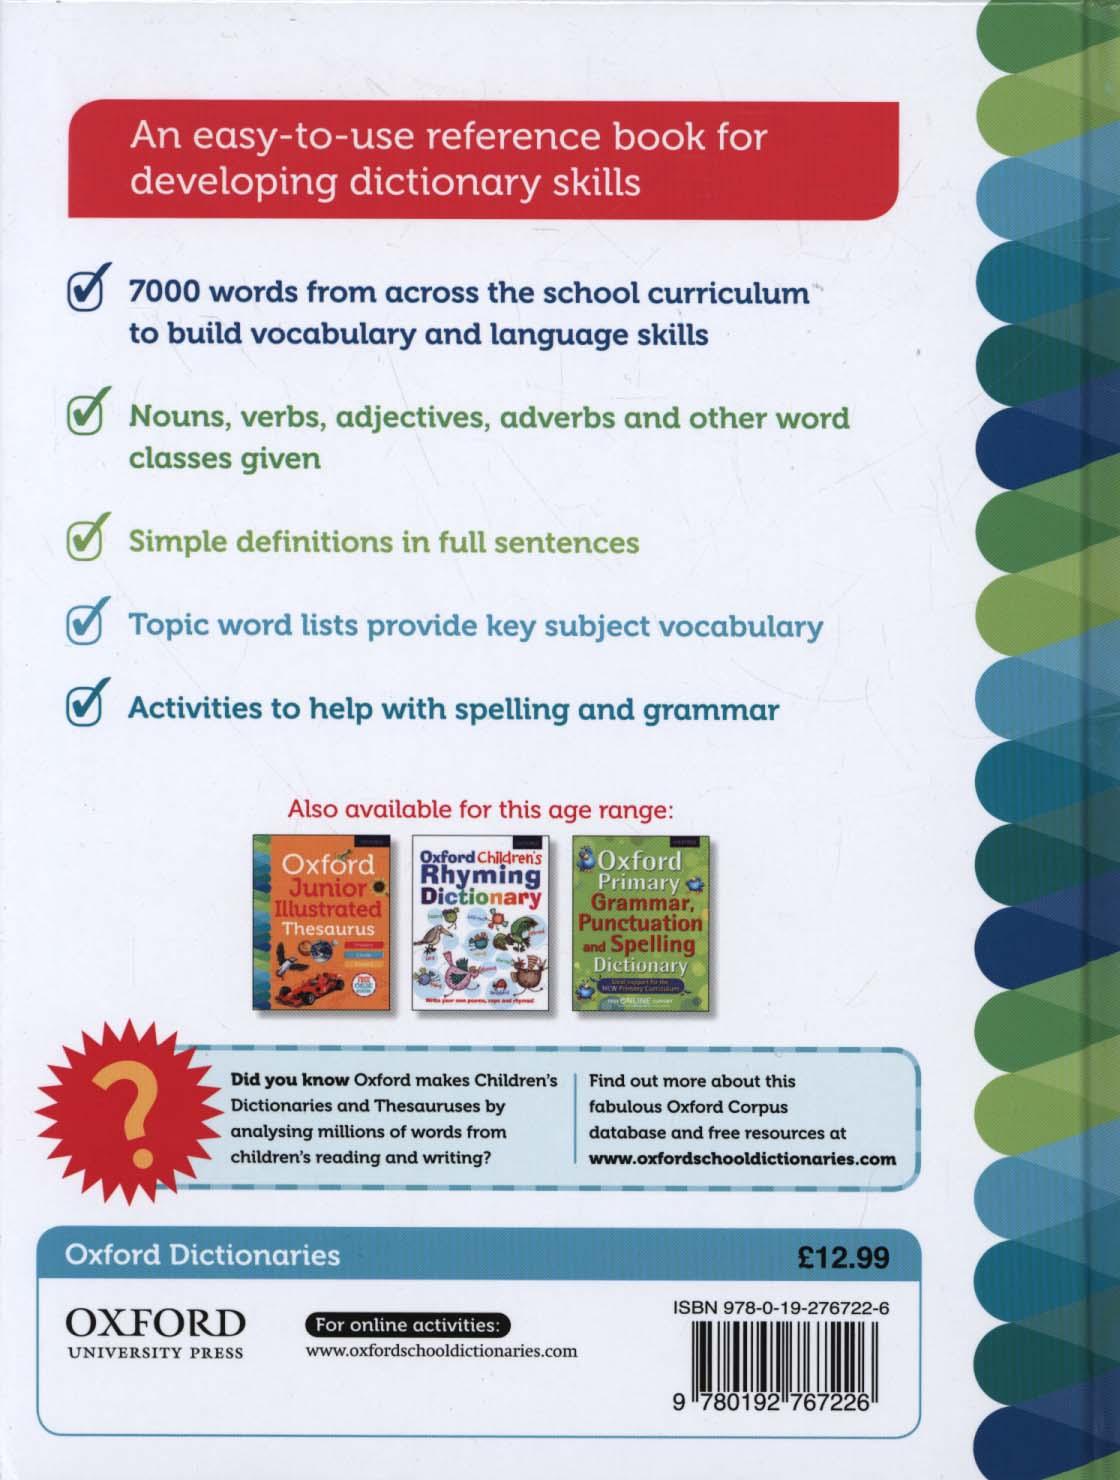 Oxford Junior Illustrated Dictionary